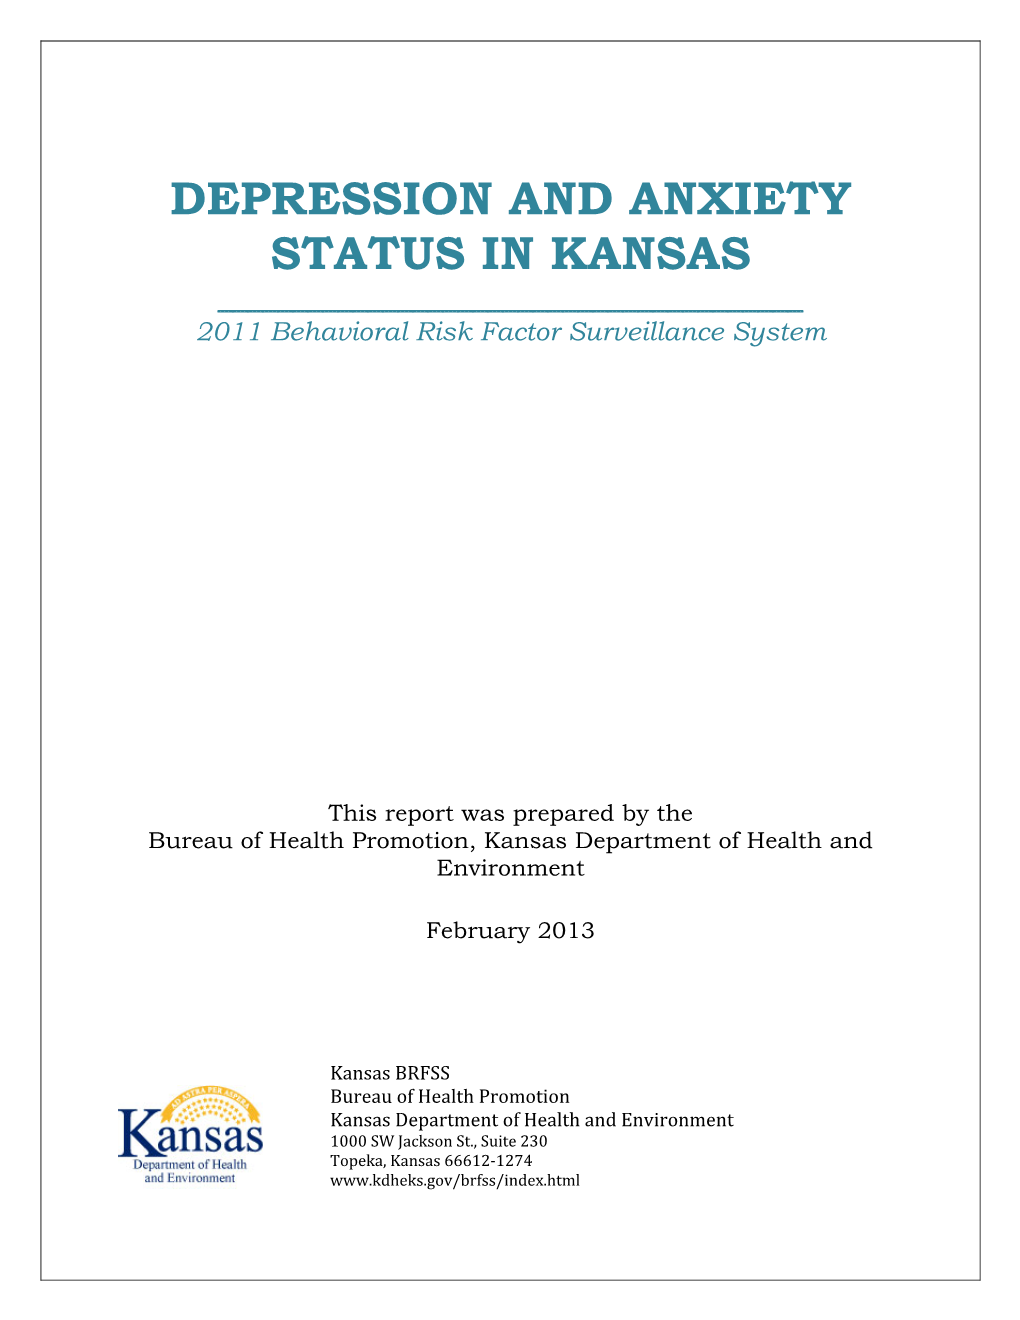 Depression and Anxiety Status in Kansas